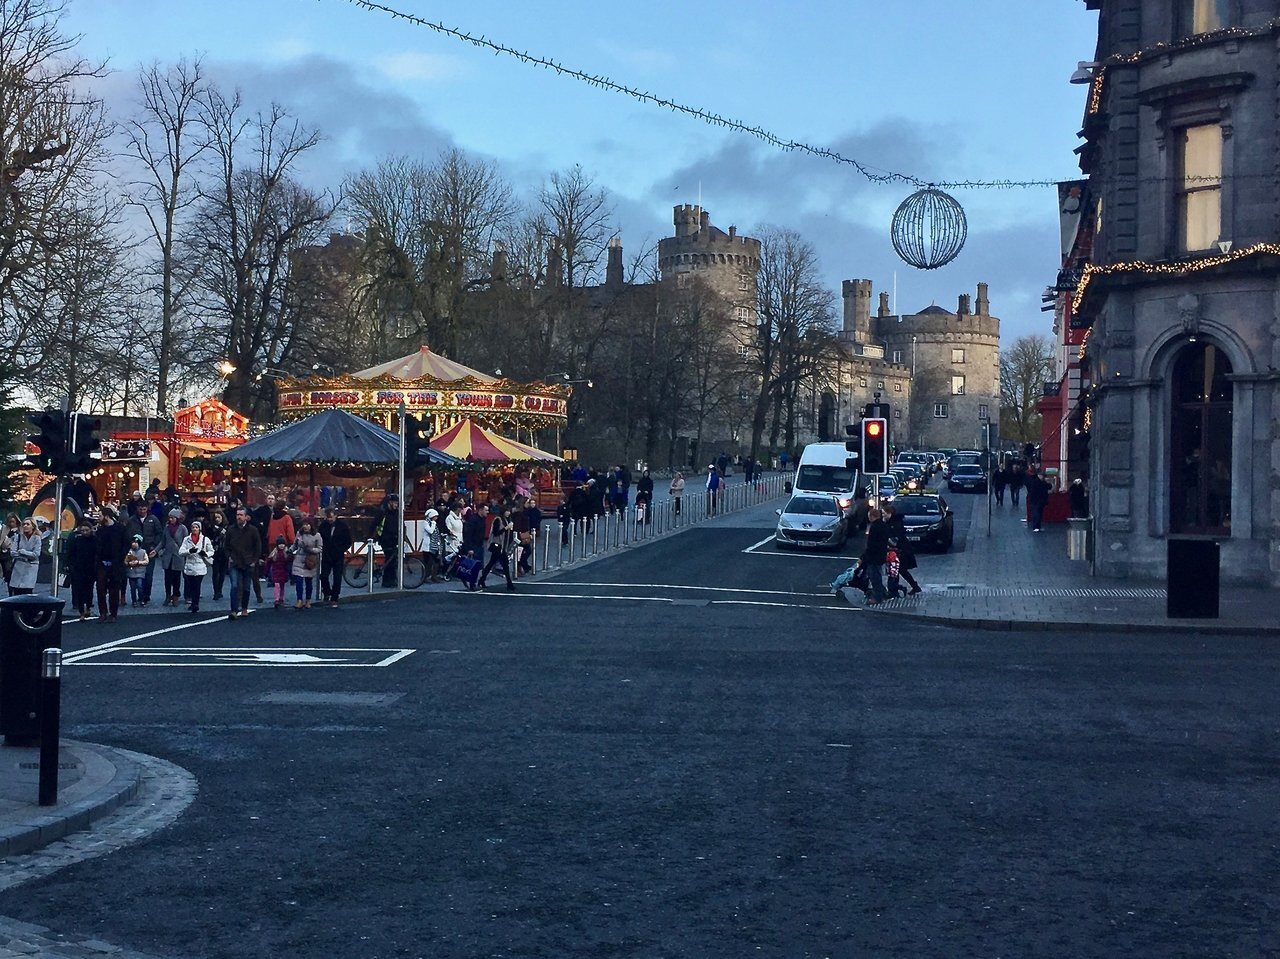 Kilkenny Castle during the holidays